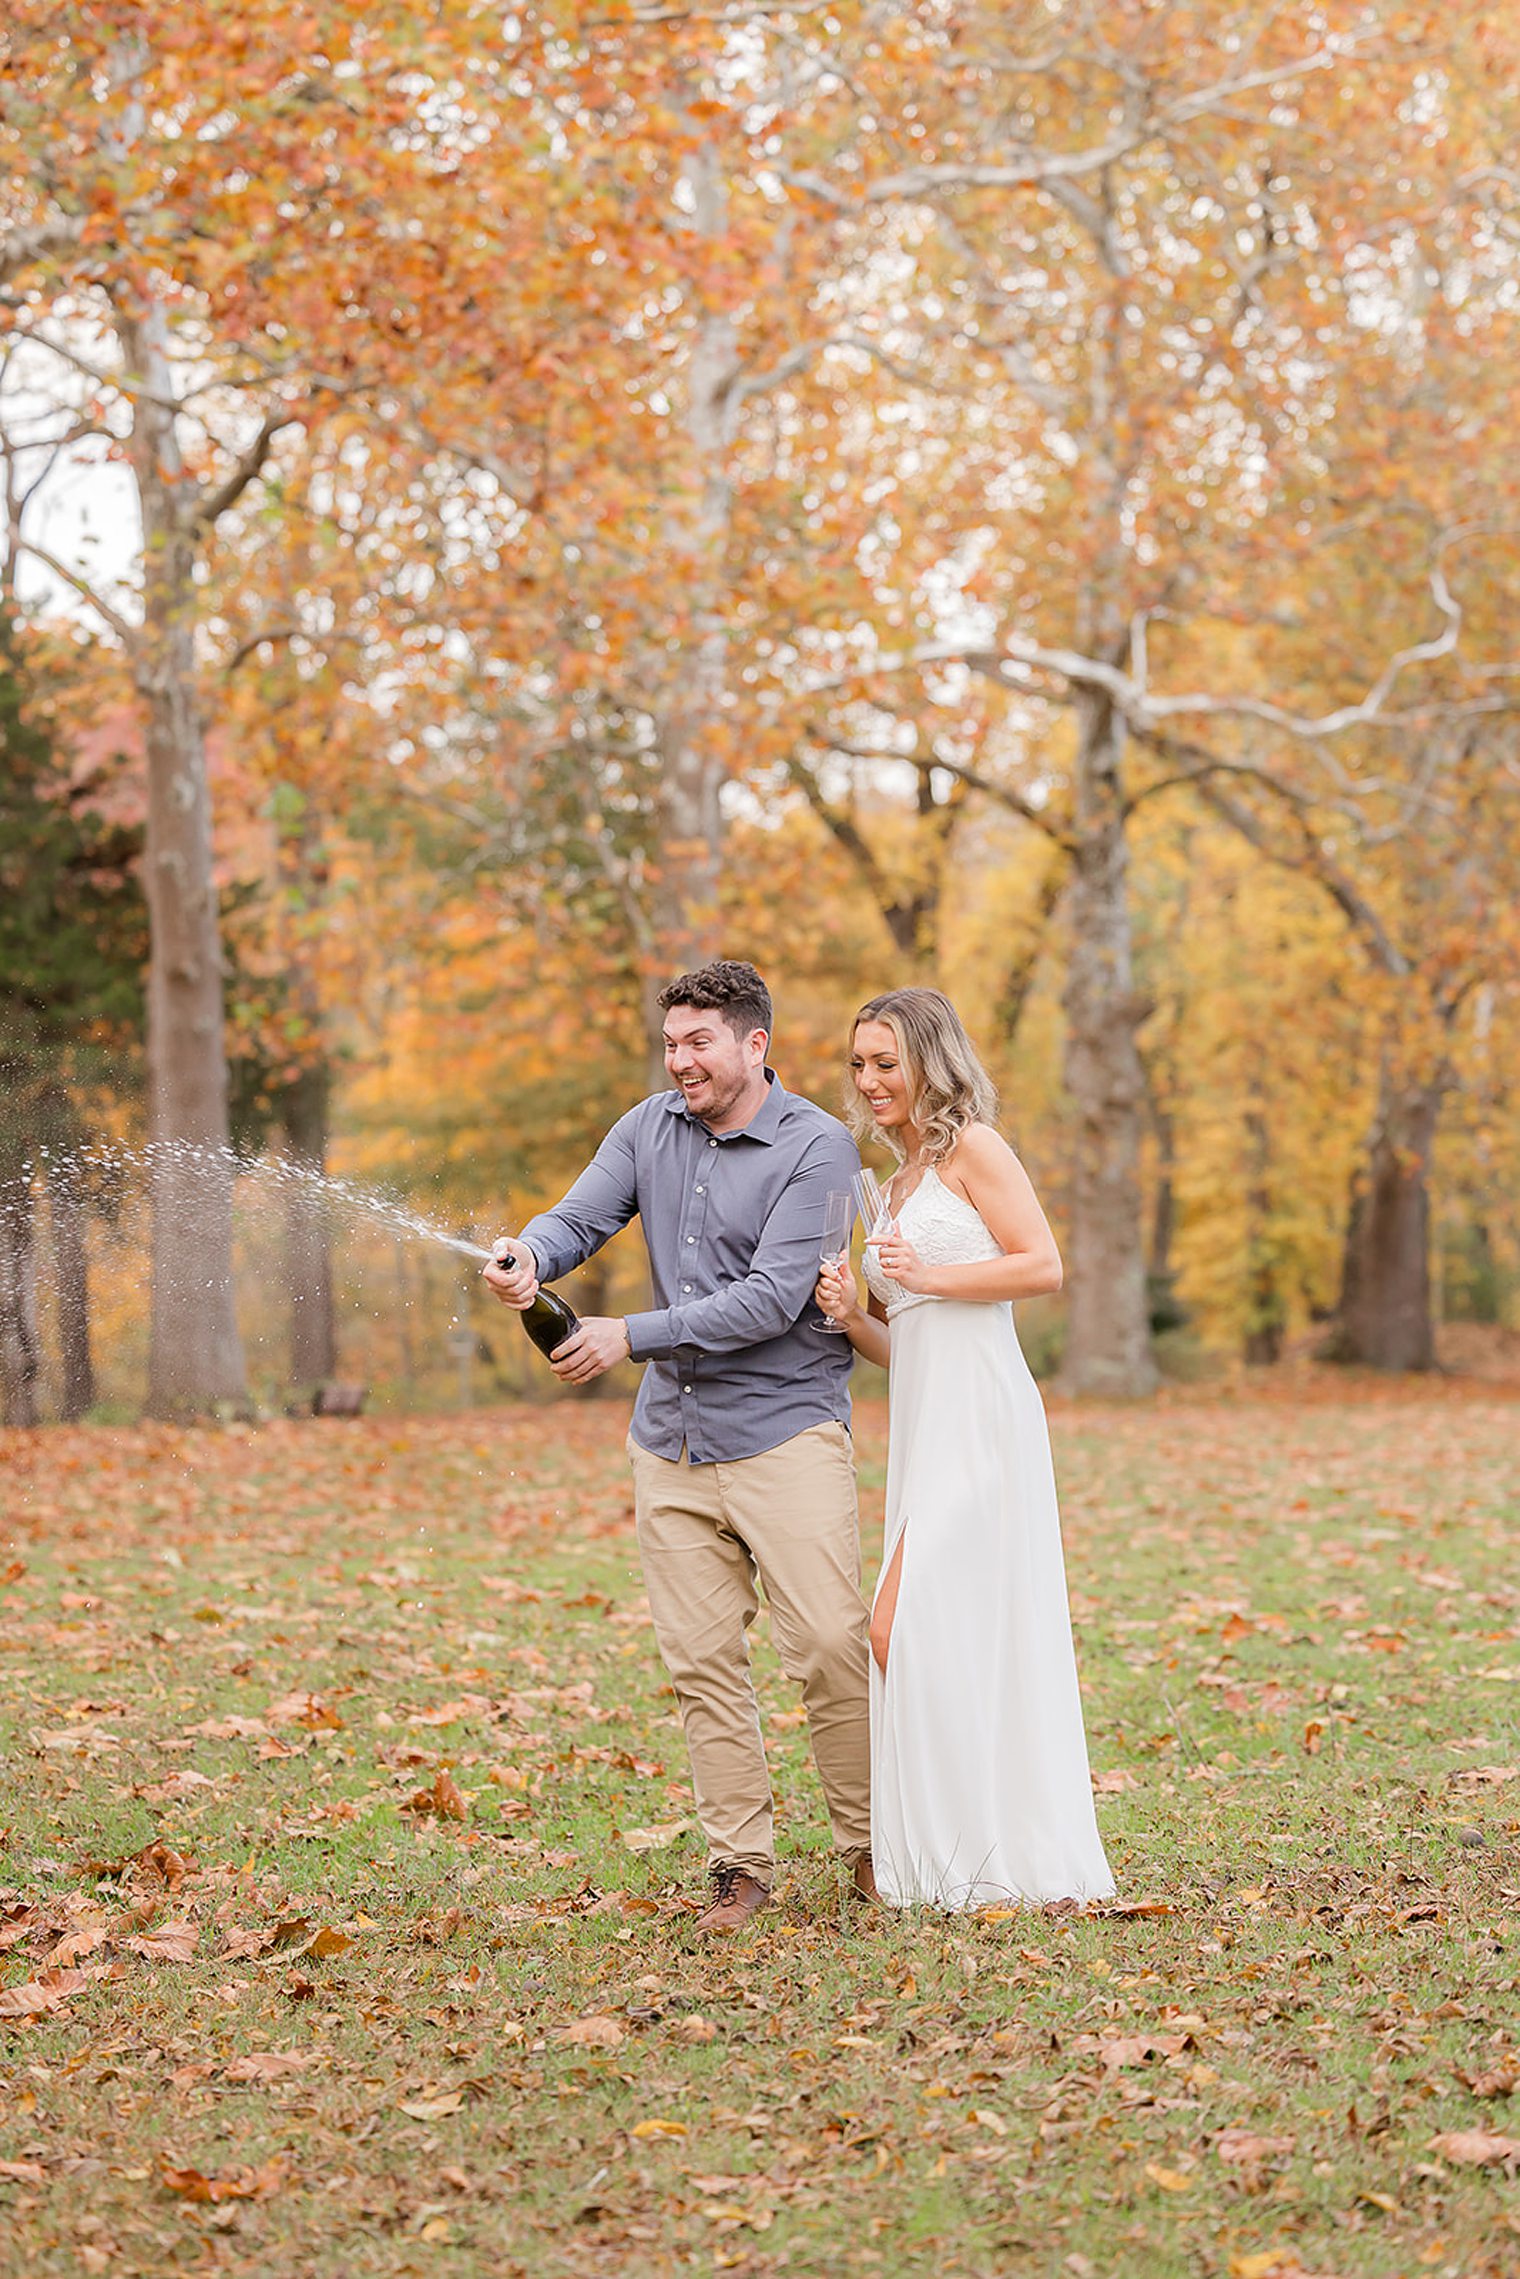 Future husband and wife popping a bottle of champagne in their engagement session